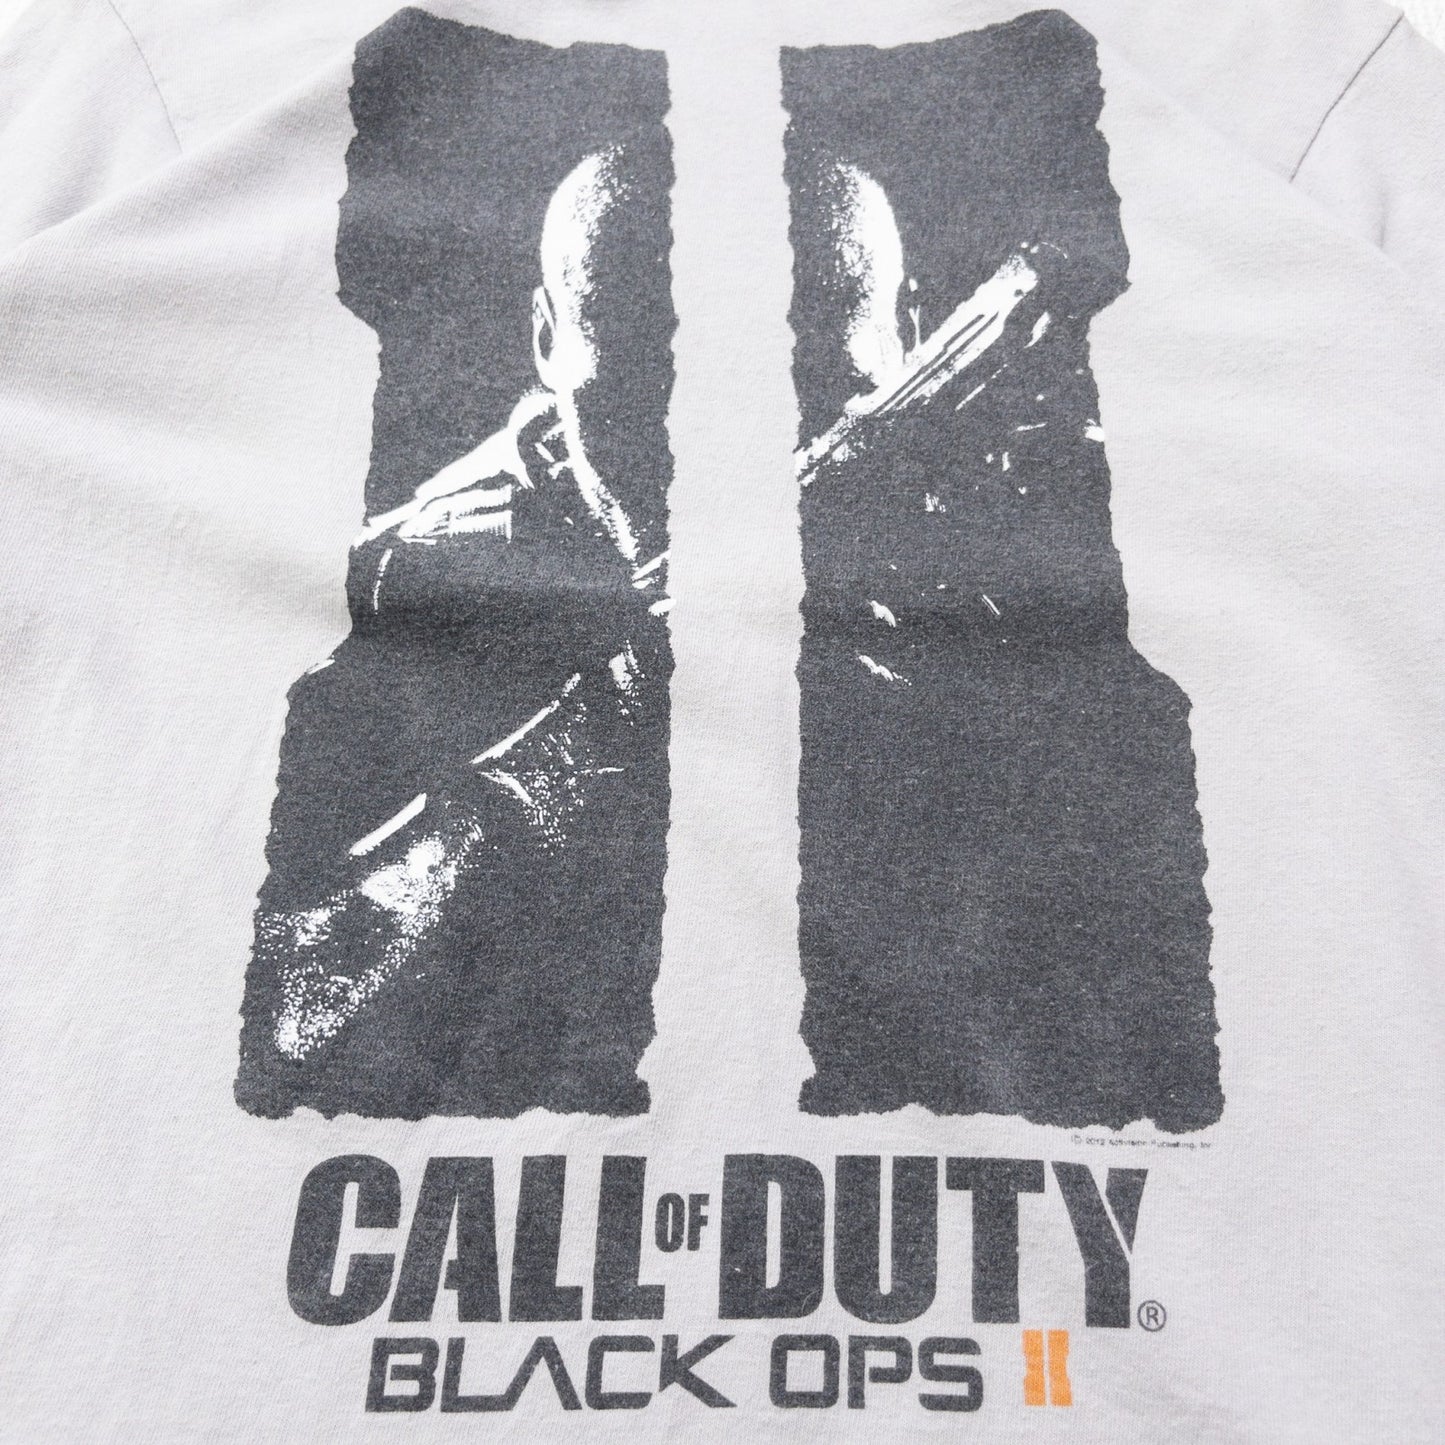 00s CALL OF DUTY ”BLACK OPS2” M